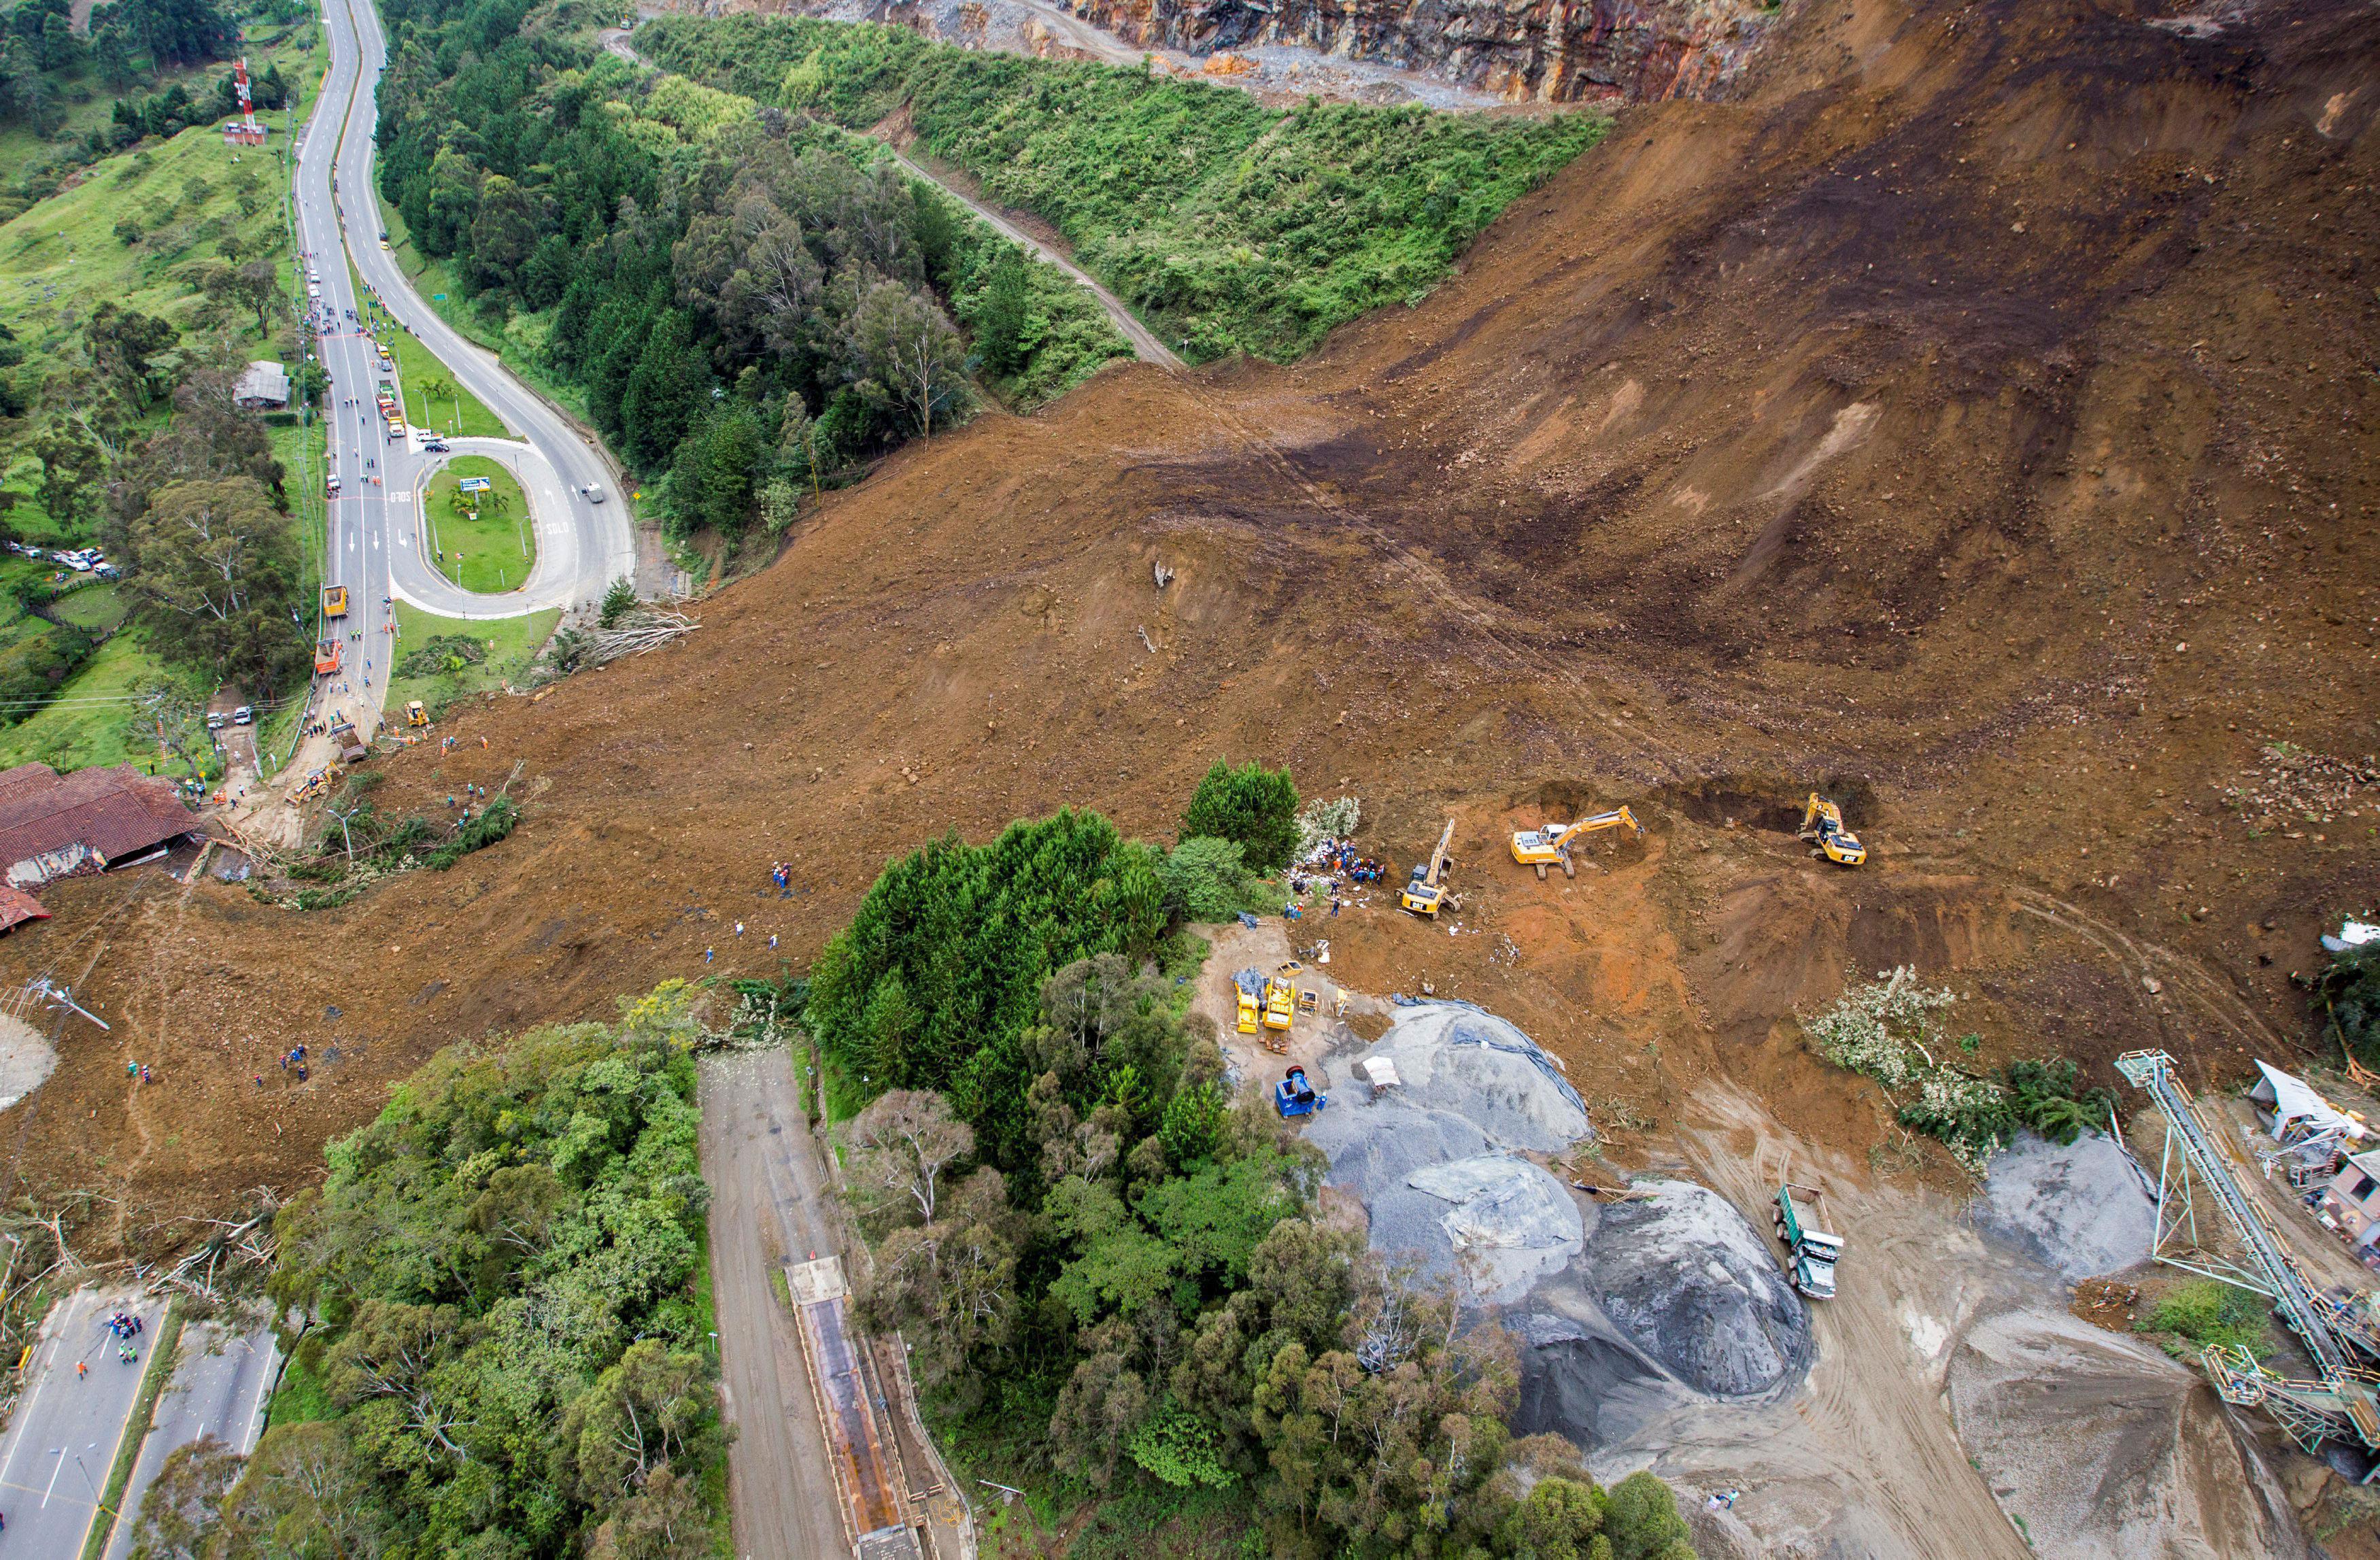 General view of a landslide that affected the Medellin-Bogota highway in Colombia